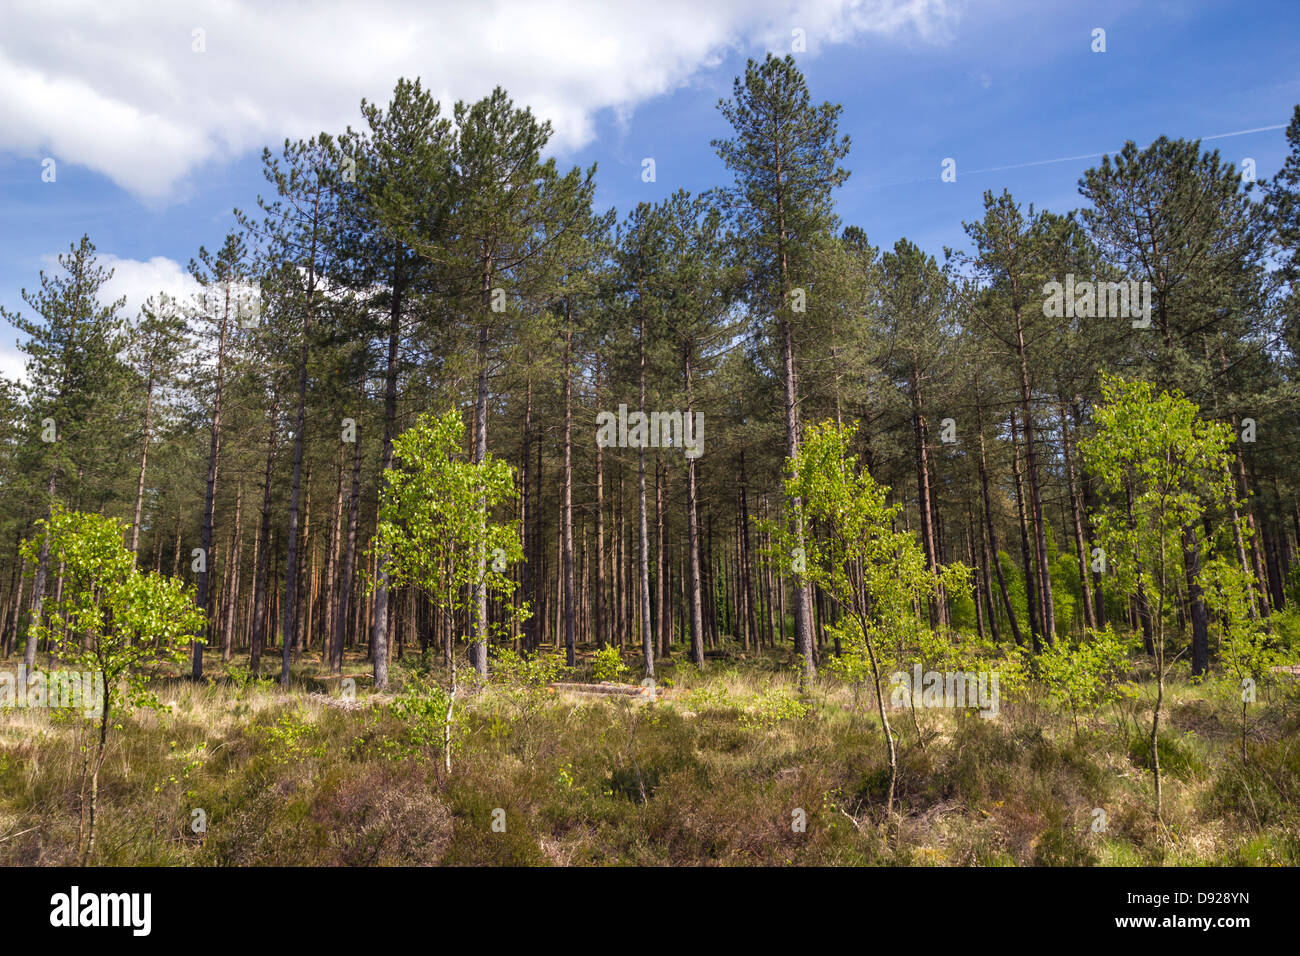 Tall Pine Trees / Fir Trees / Larch trees in monoculture forest plantation Stock Photo